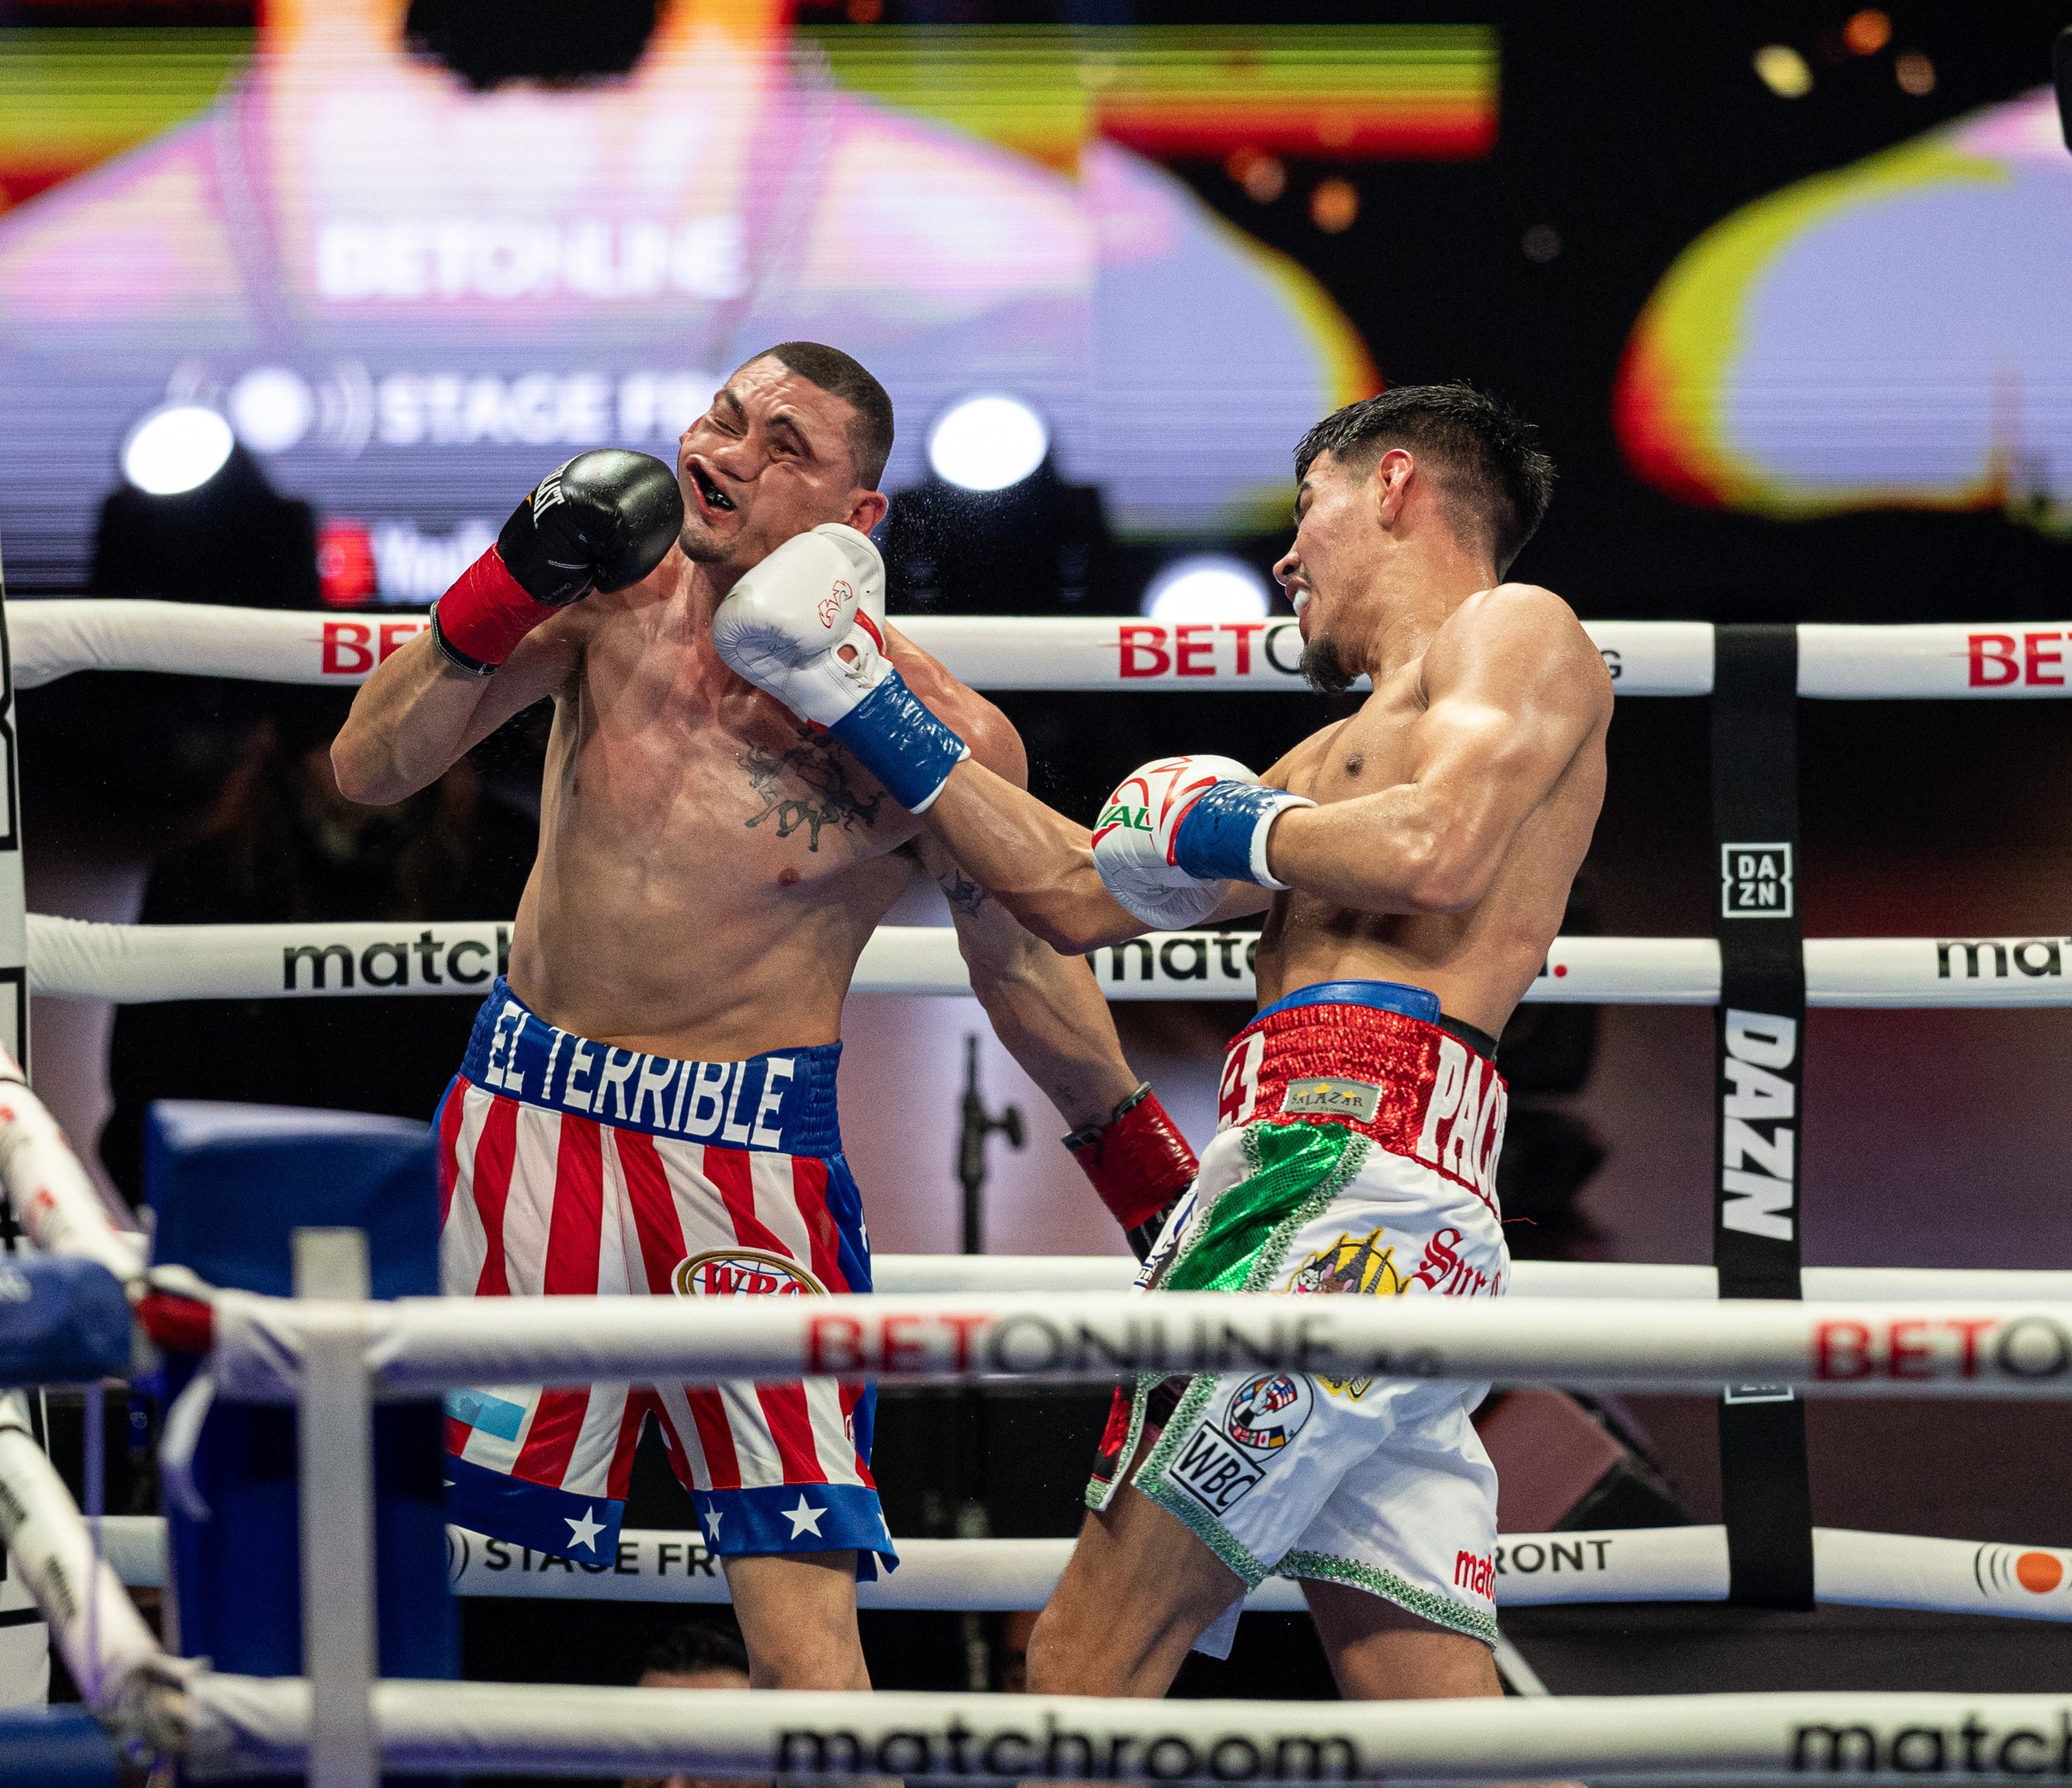  Diego Pacheco(R) uppercutting Marcelo Coceres(L) for the knockout to extend his record 20-0. Pacheco and Coceres fought for the WBO International and USWBC Super-Bantamweight titles in YouTube Theater at Inglewood, Calif. on Saturday, Nov. 18. (Dani